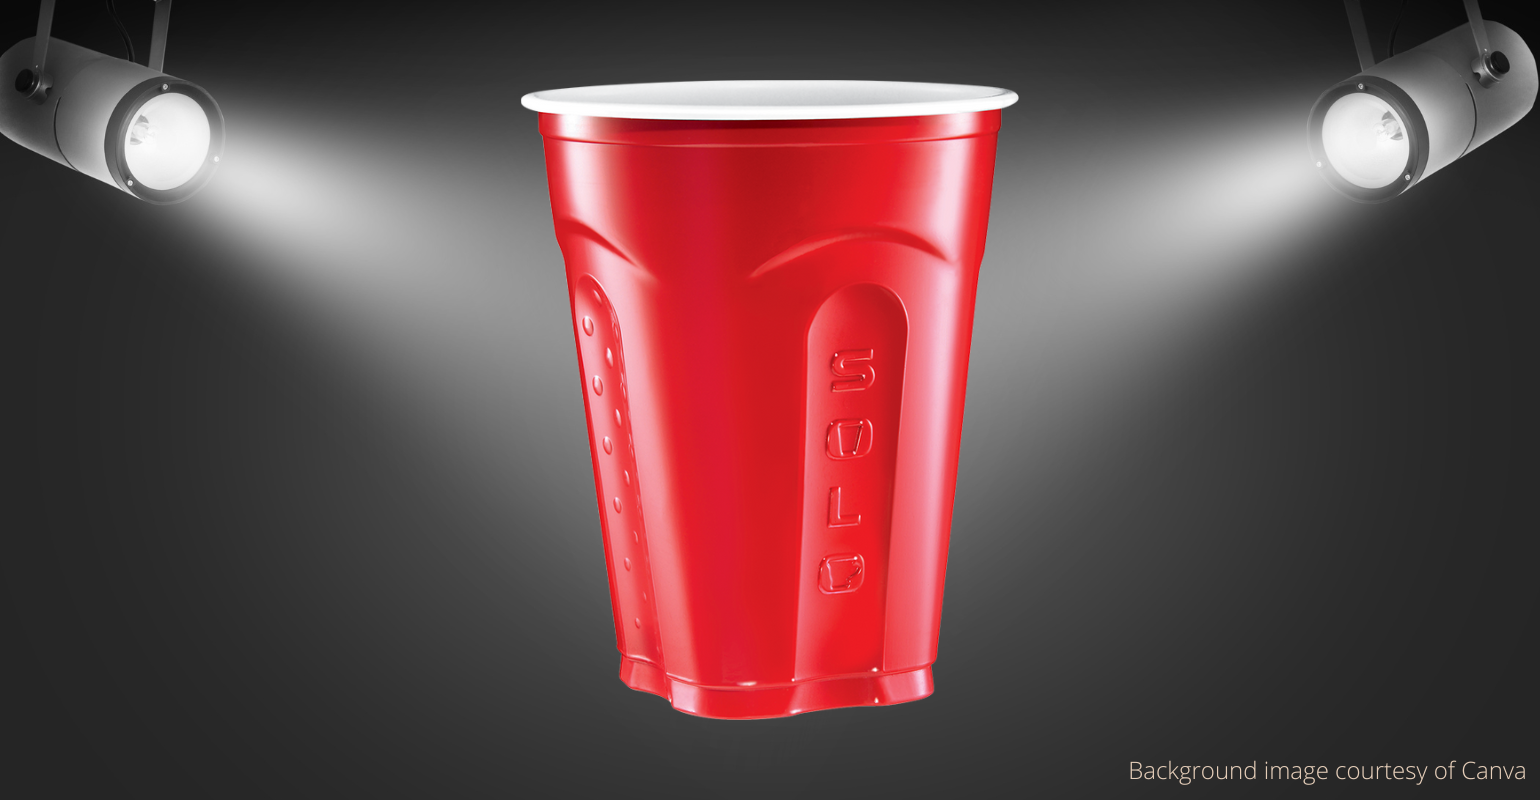 That red plastic cup is a Chicago original. Proceed to party.